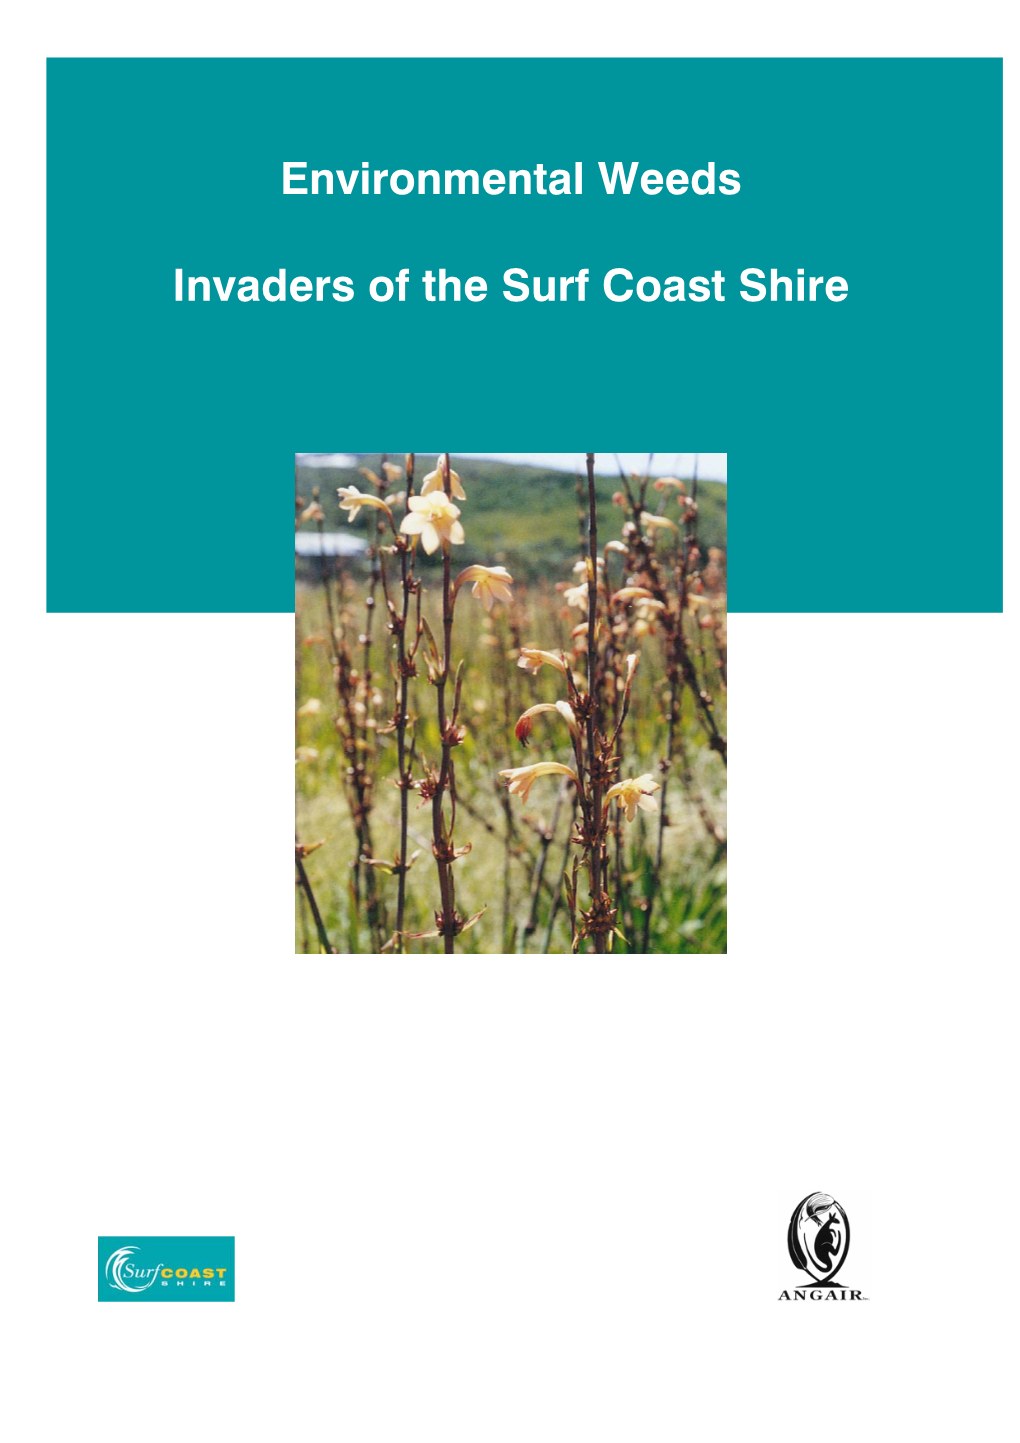 Environmental Weeds Invaders of the Surf Coast Shire